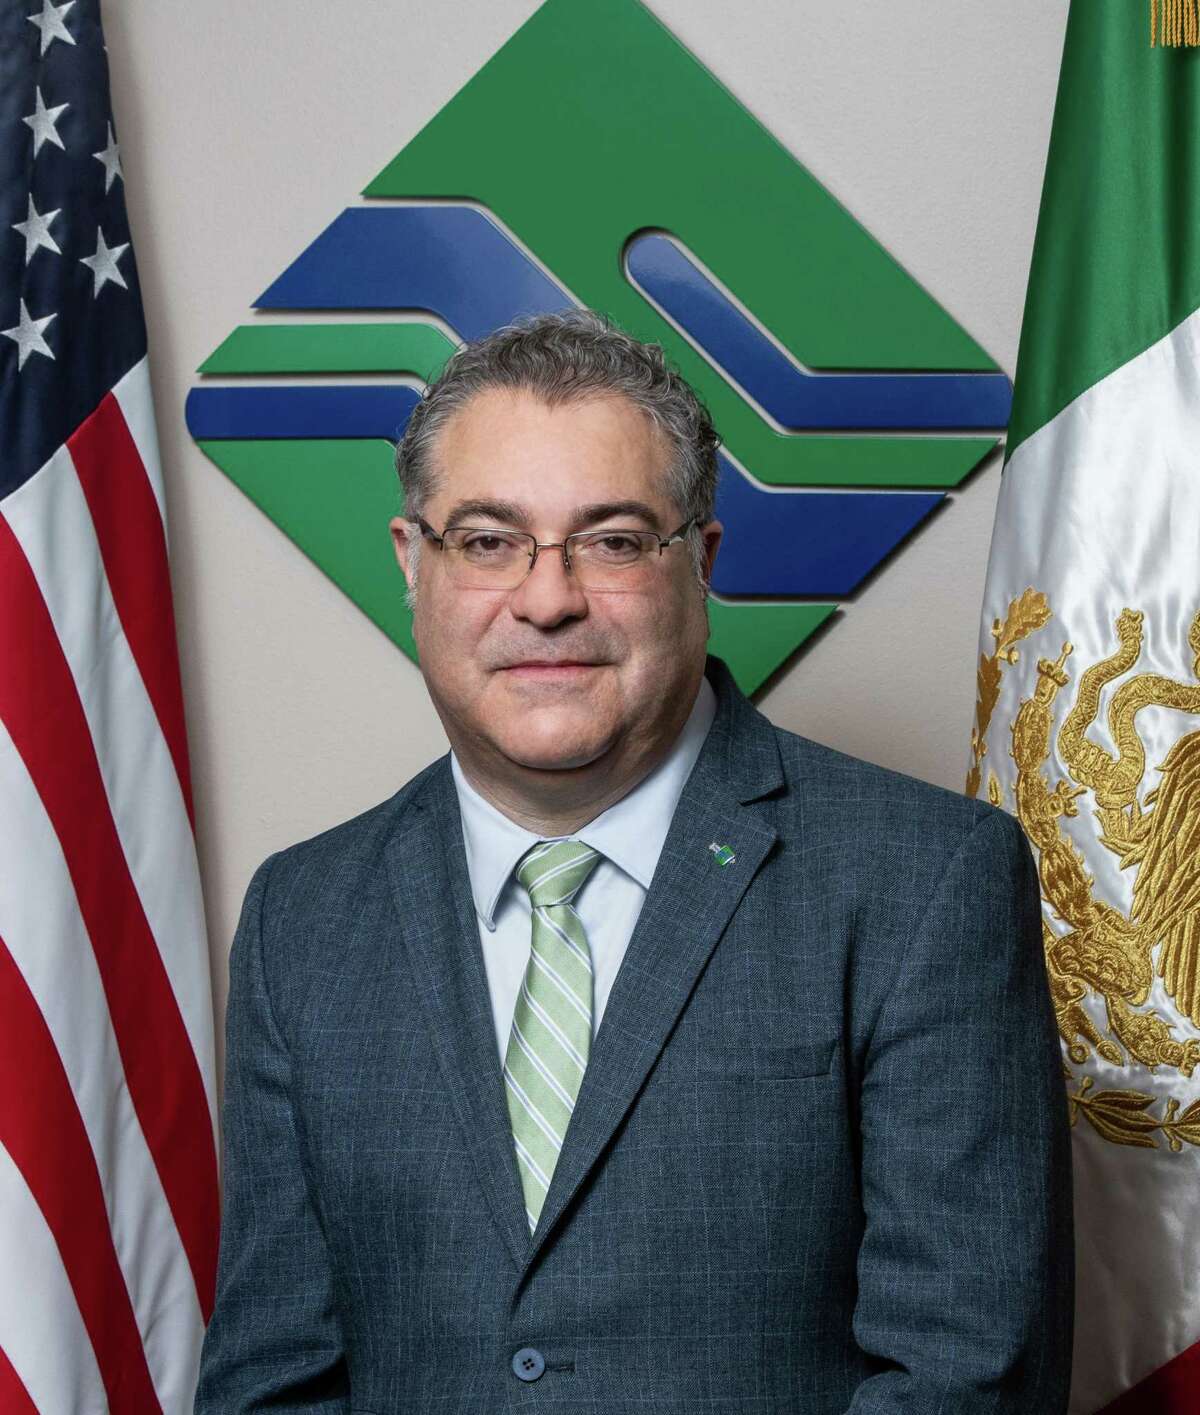 Calixto Mateos-Hanel is managing director of the North American Development Bank.